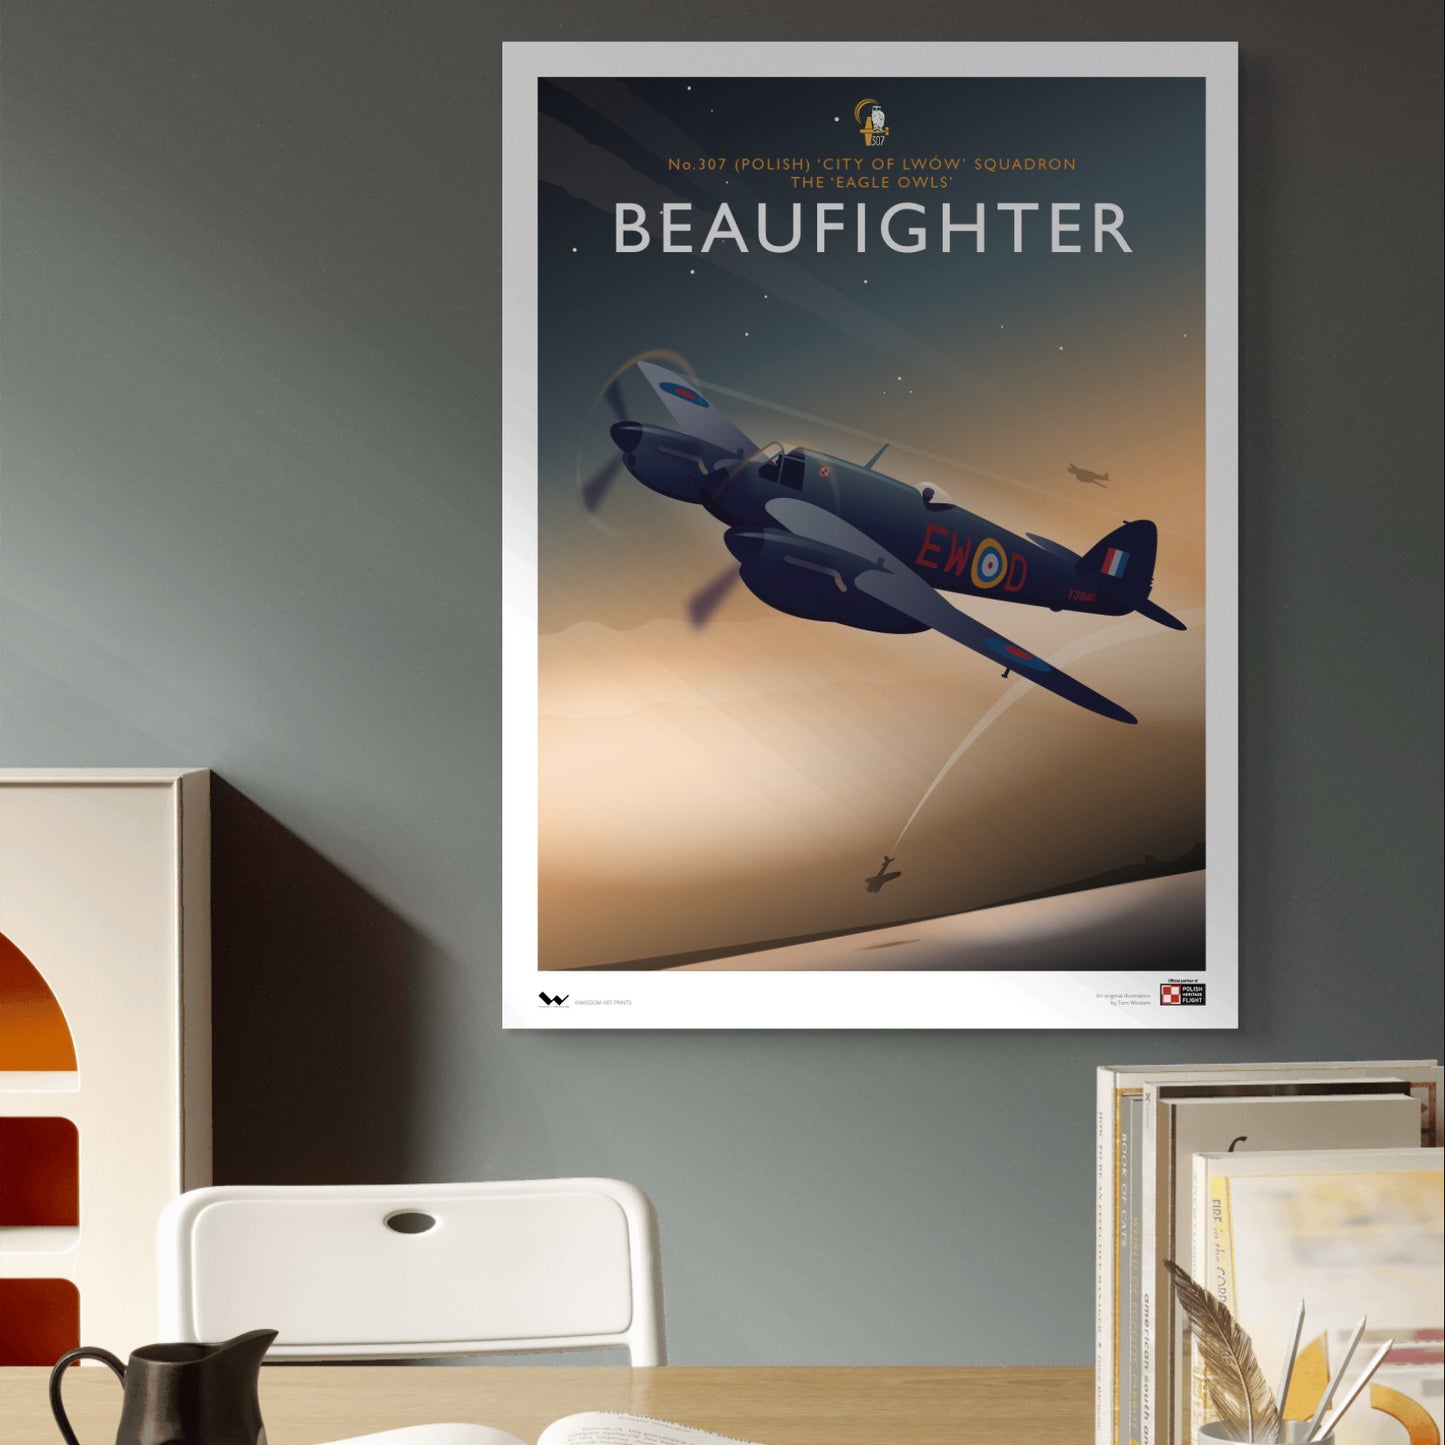 Beaufighter (No. 307 Squadron RAF)